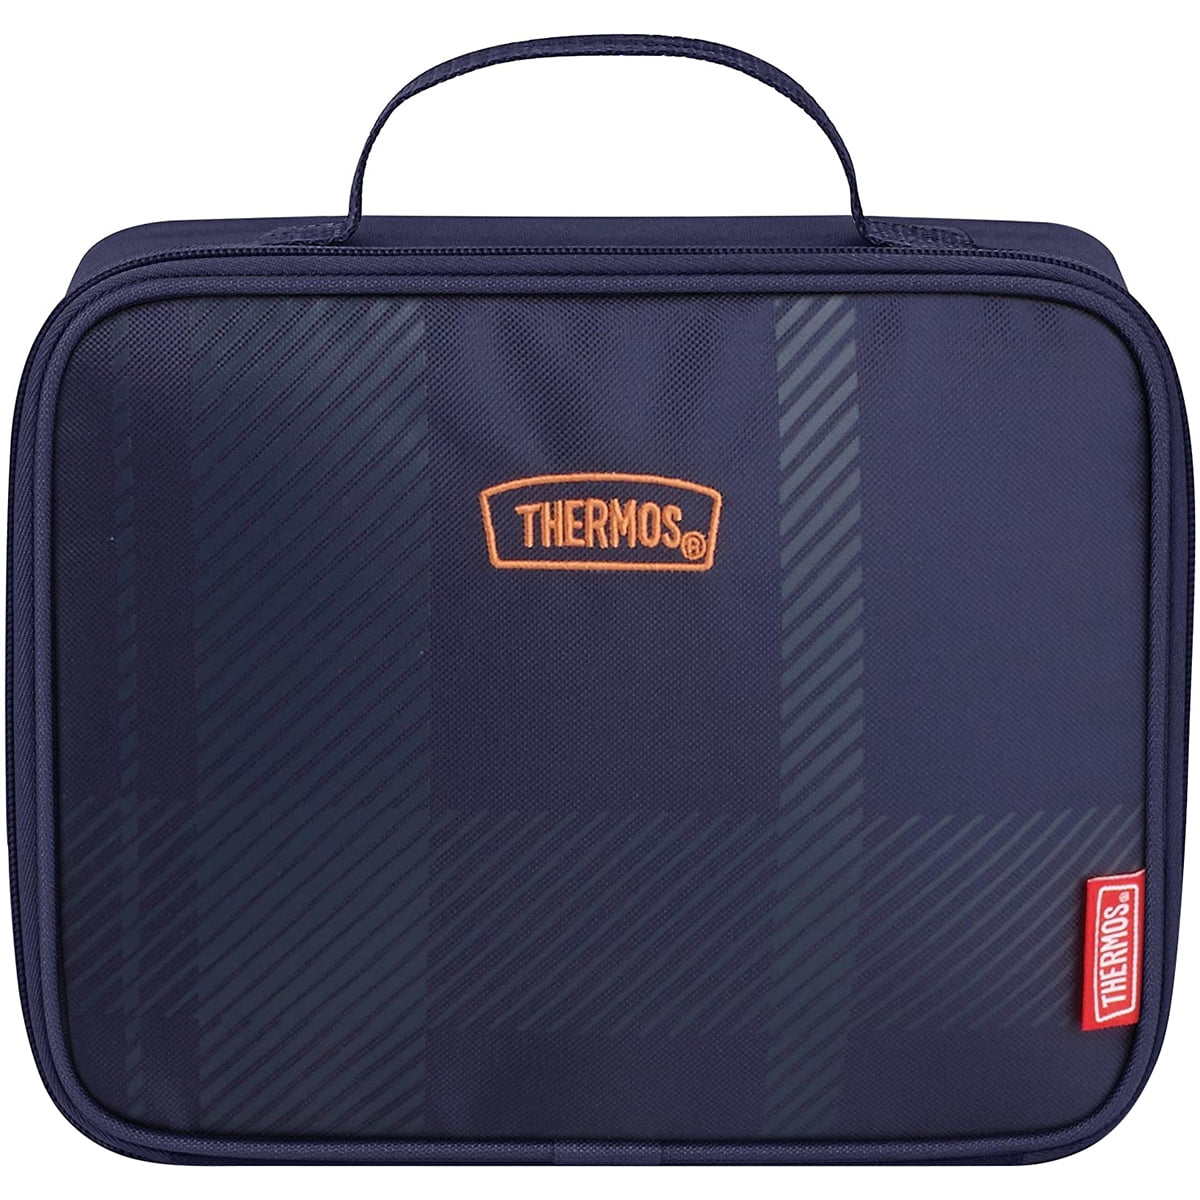 THERMOS Lunch Box Bento food container Navy Brand New